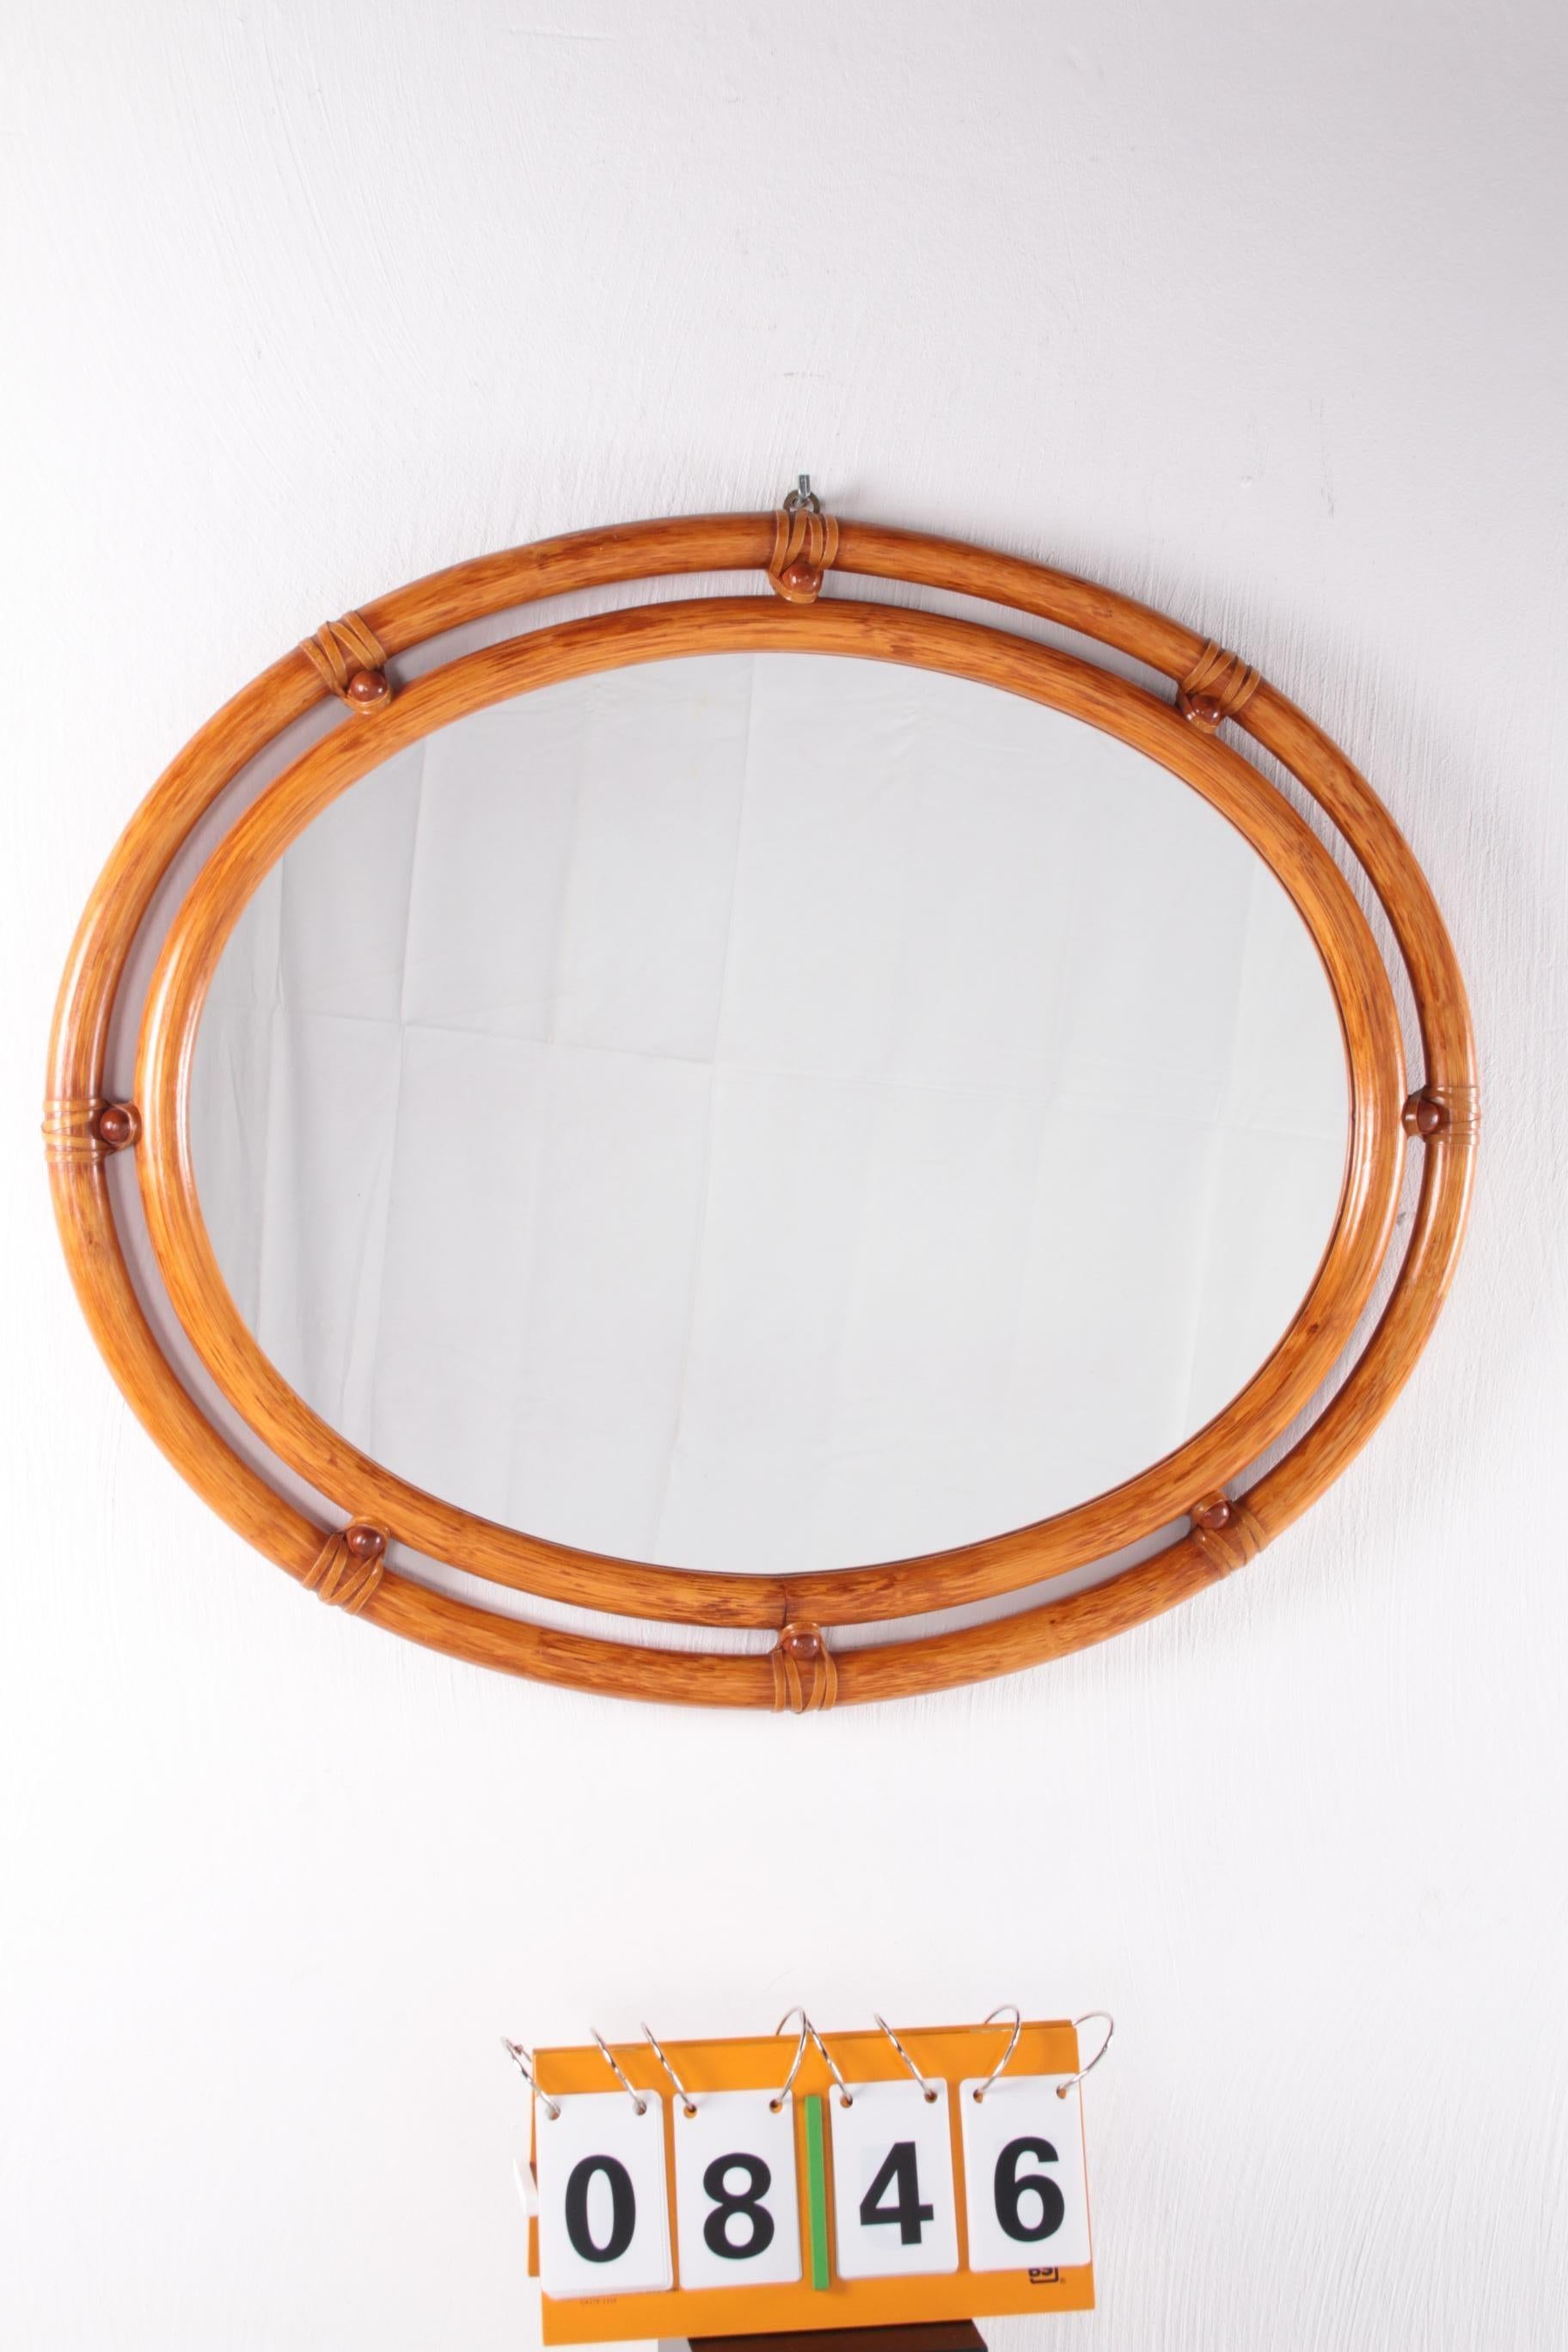 This beautiful oval bamboo vintage mirror is framed with bamboo. The mirror is nice and large in size and gives a nice natural touch to your interior. Perfect for bohemian lovers!
You can hang the mirror on the metal hook on the back. Also an